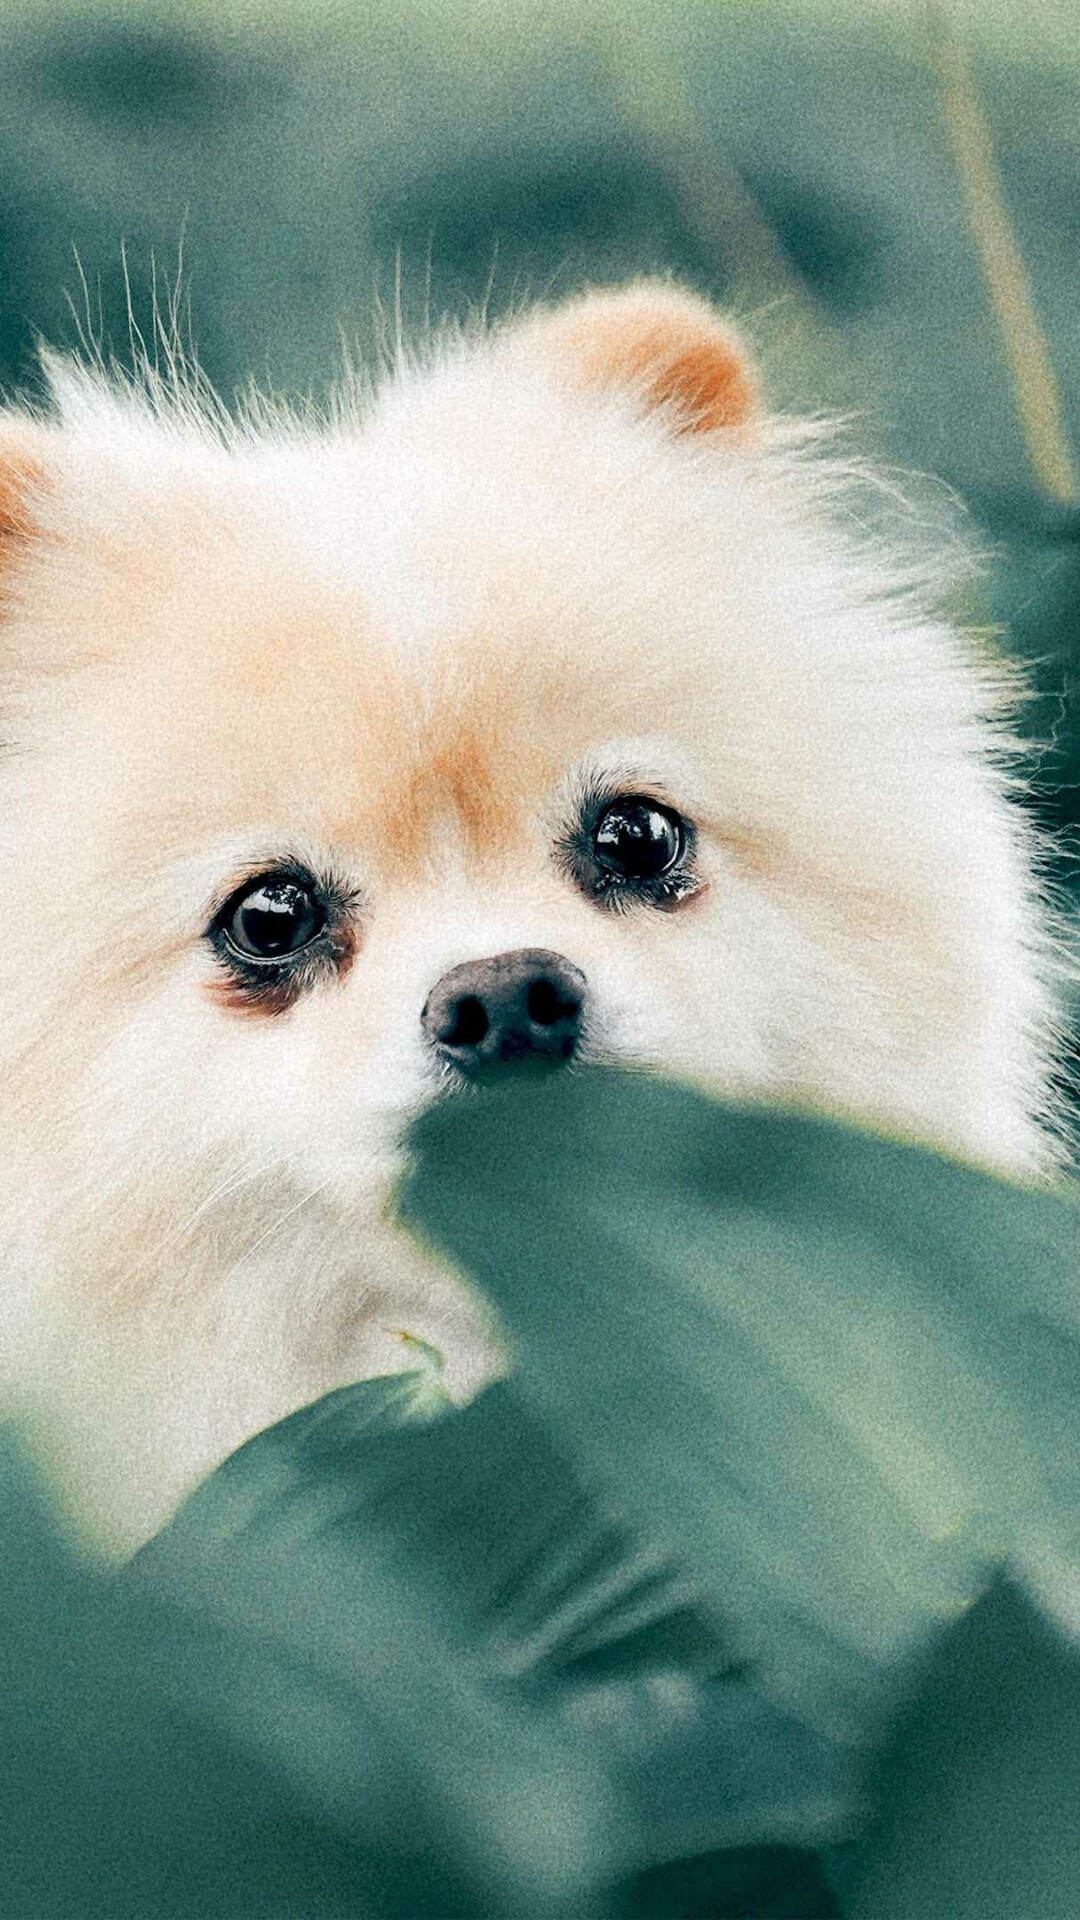 Puppy: Dog, Spitz, Heavy-coated dogs. 1080x1920 Full HD Background.